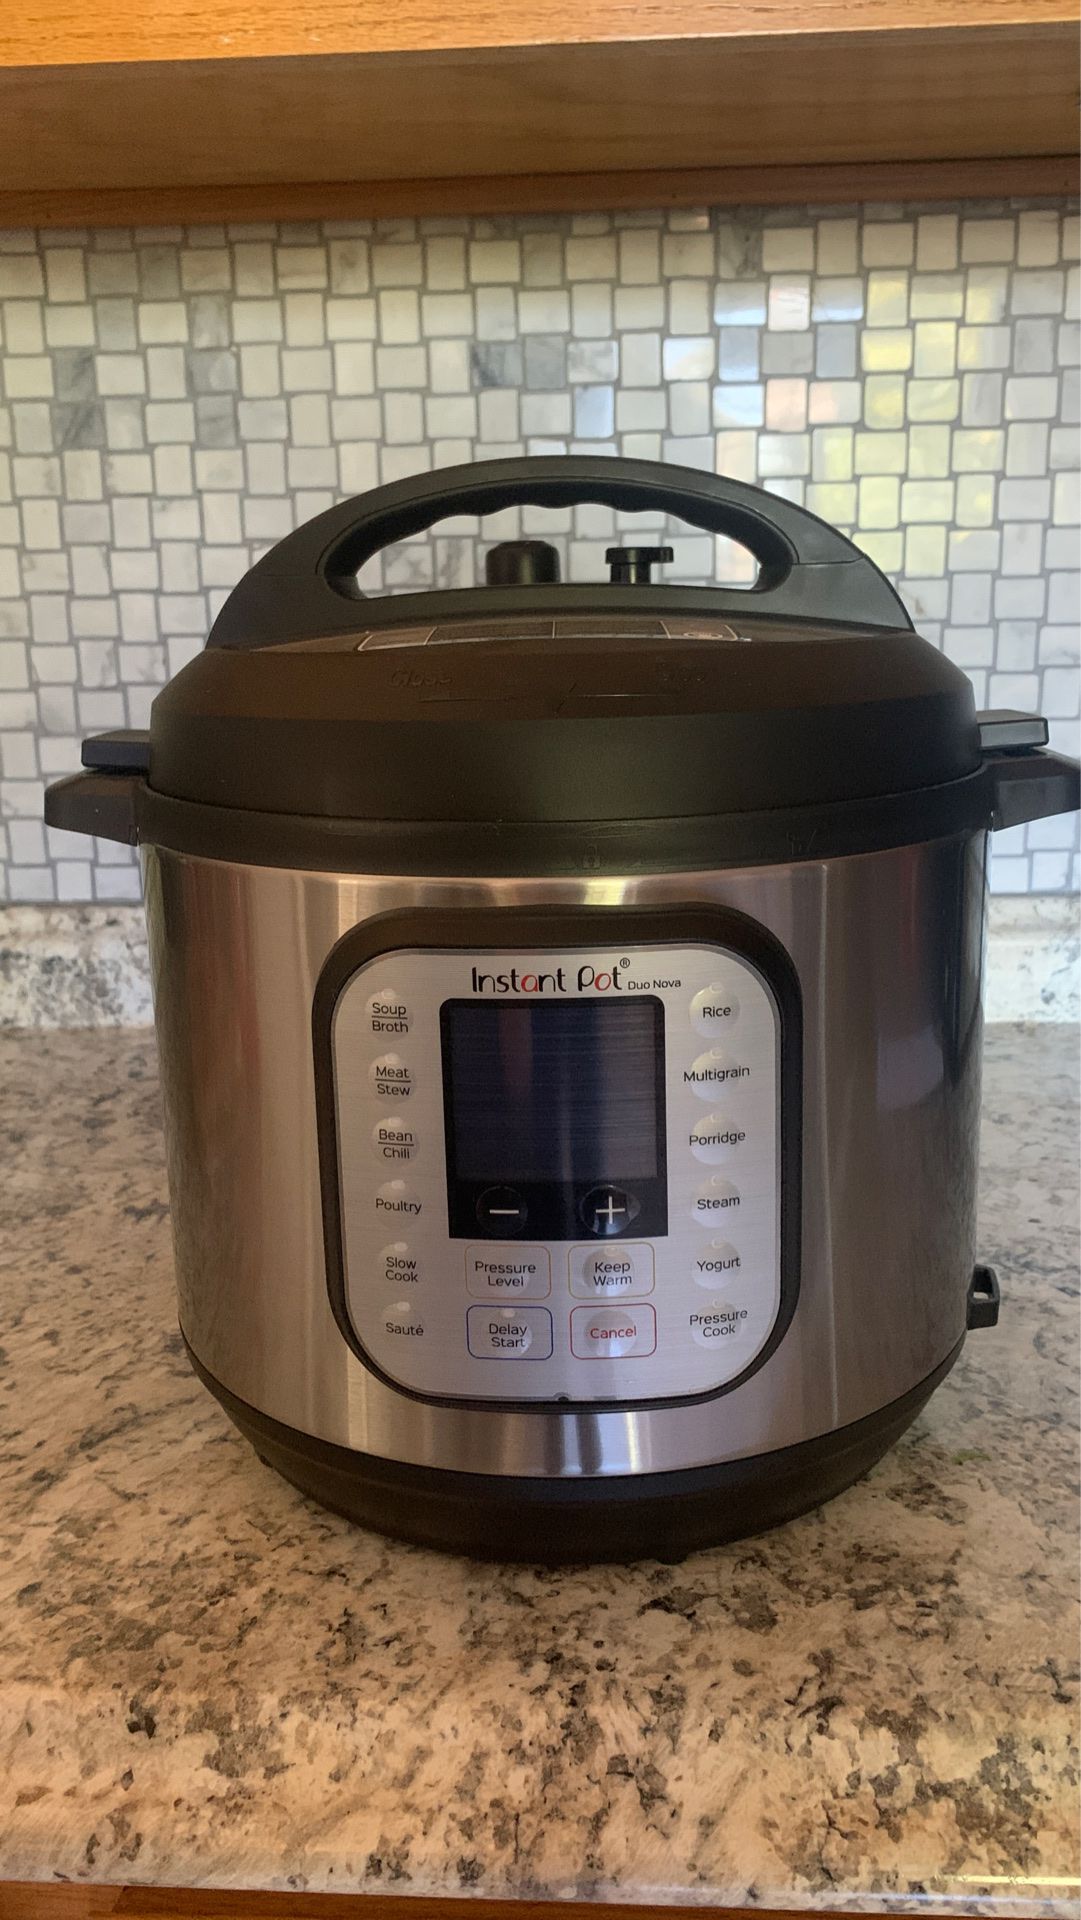 Instant pot duo nova 6 quart 7-in-1 one touch programmable pressure cooker with easy seal lid